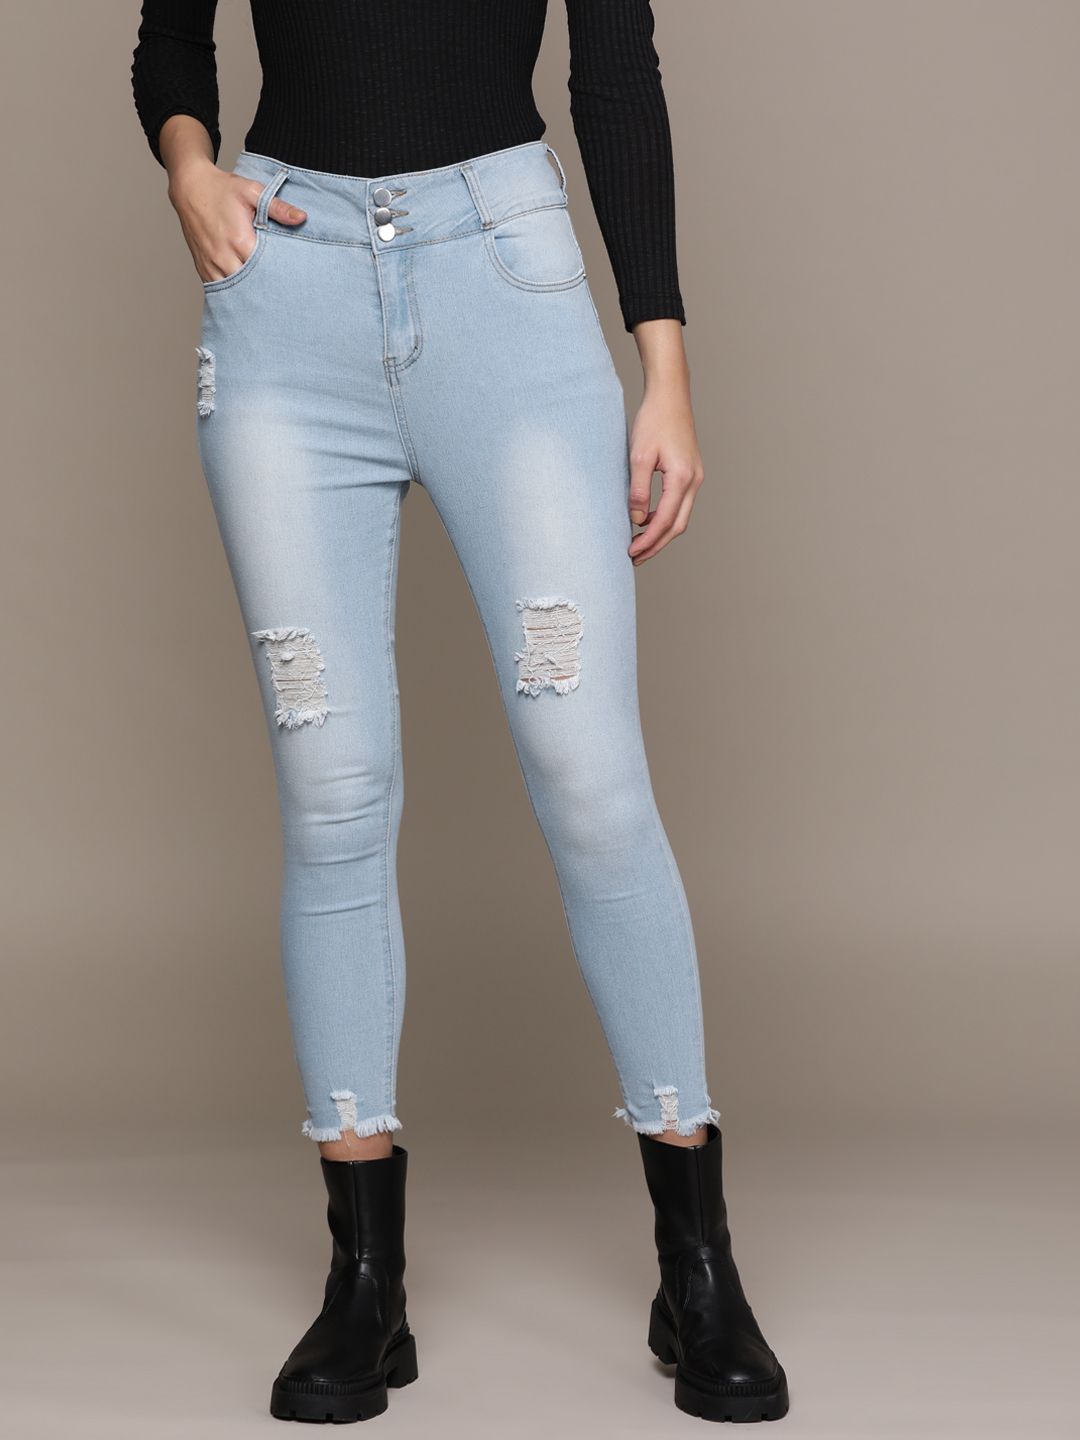 URBANIC Women Blue Skinny Fit High-Rise Mildly Distressed Light Fade Jeans Price in India